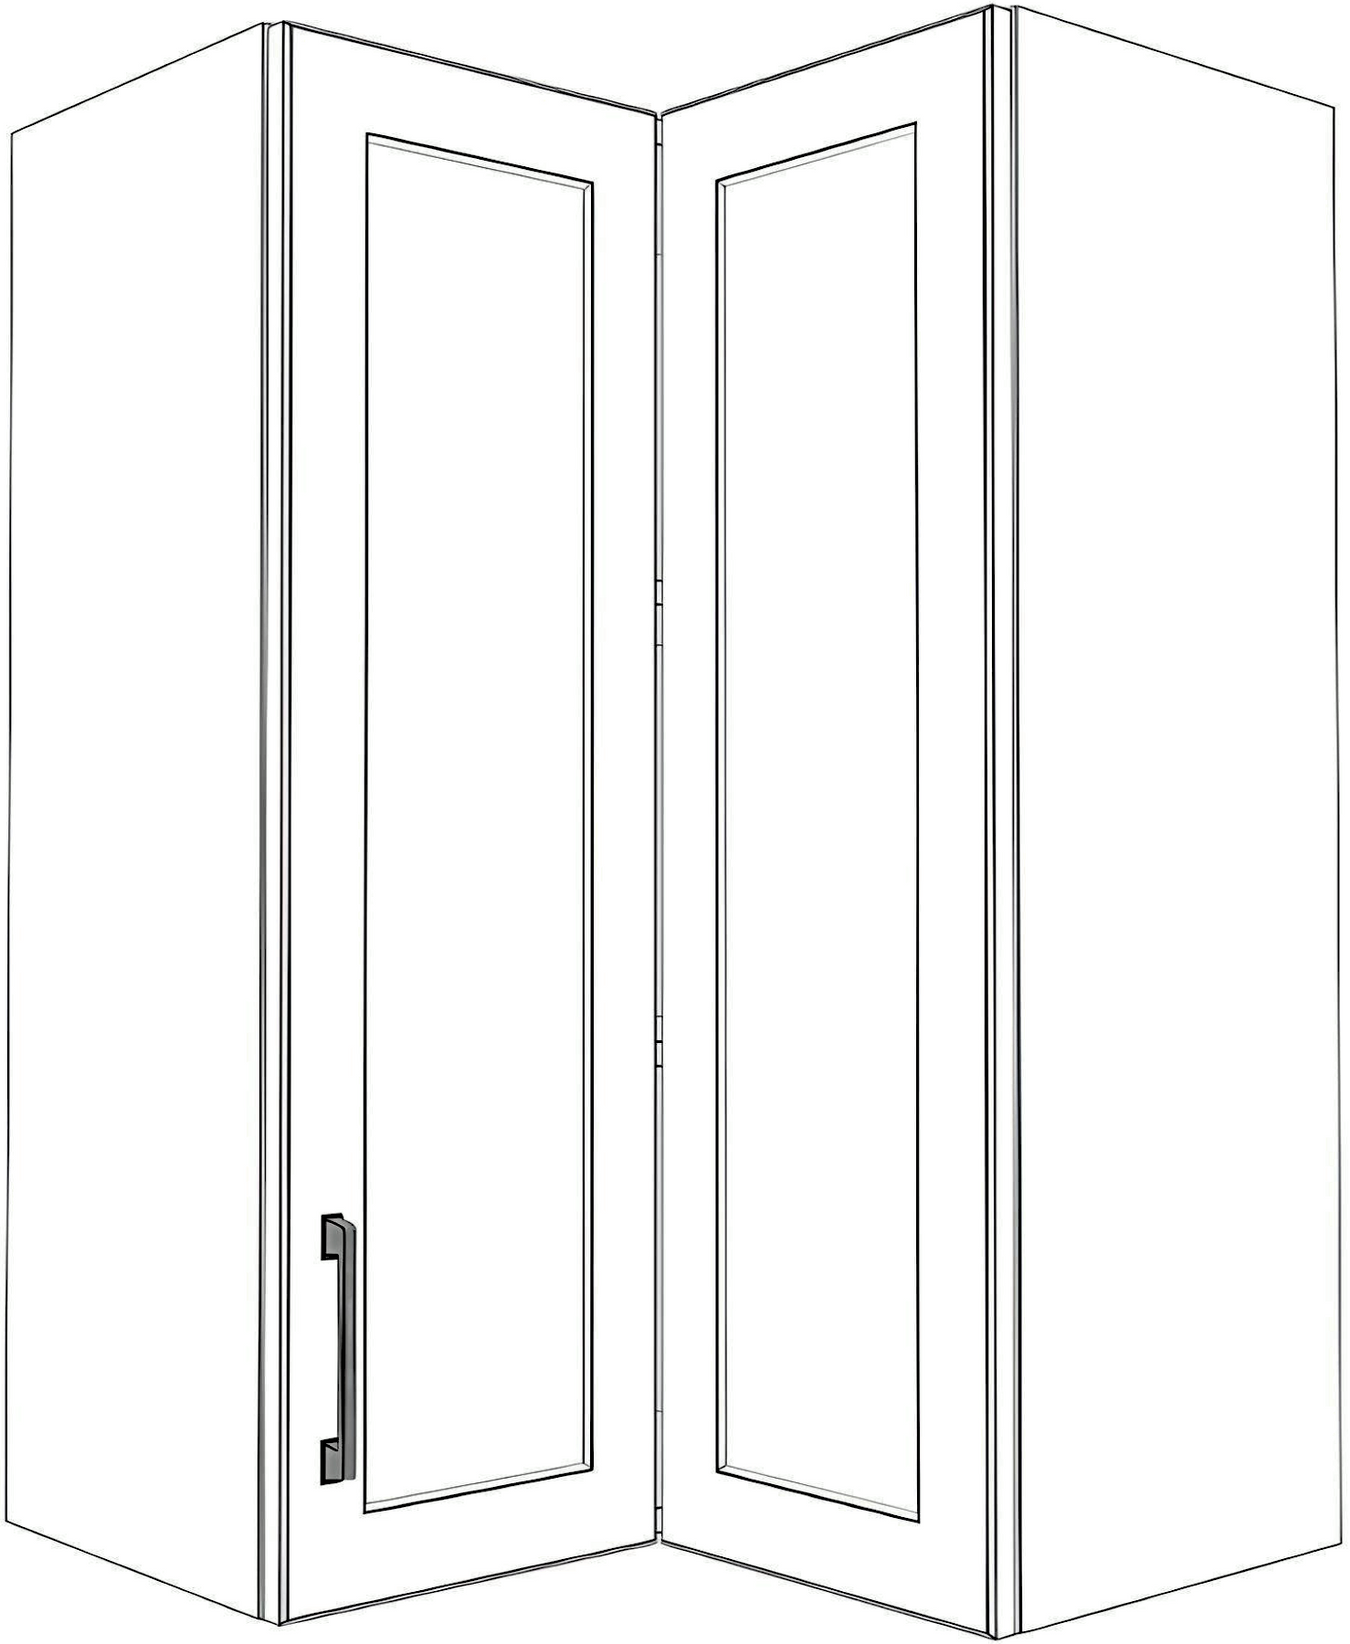 Upper Corner Cabinets - Thermofoil Doors